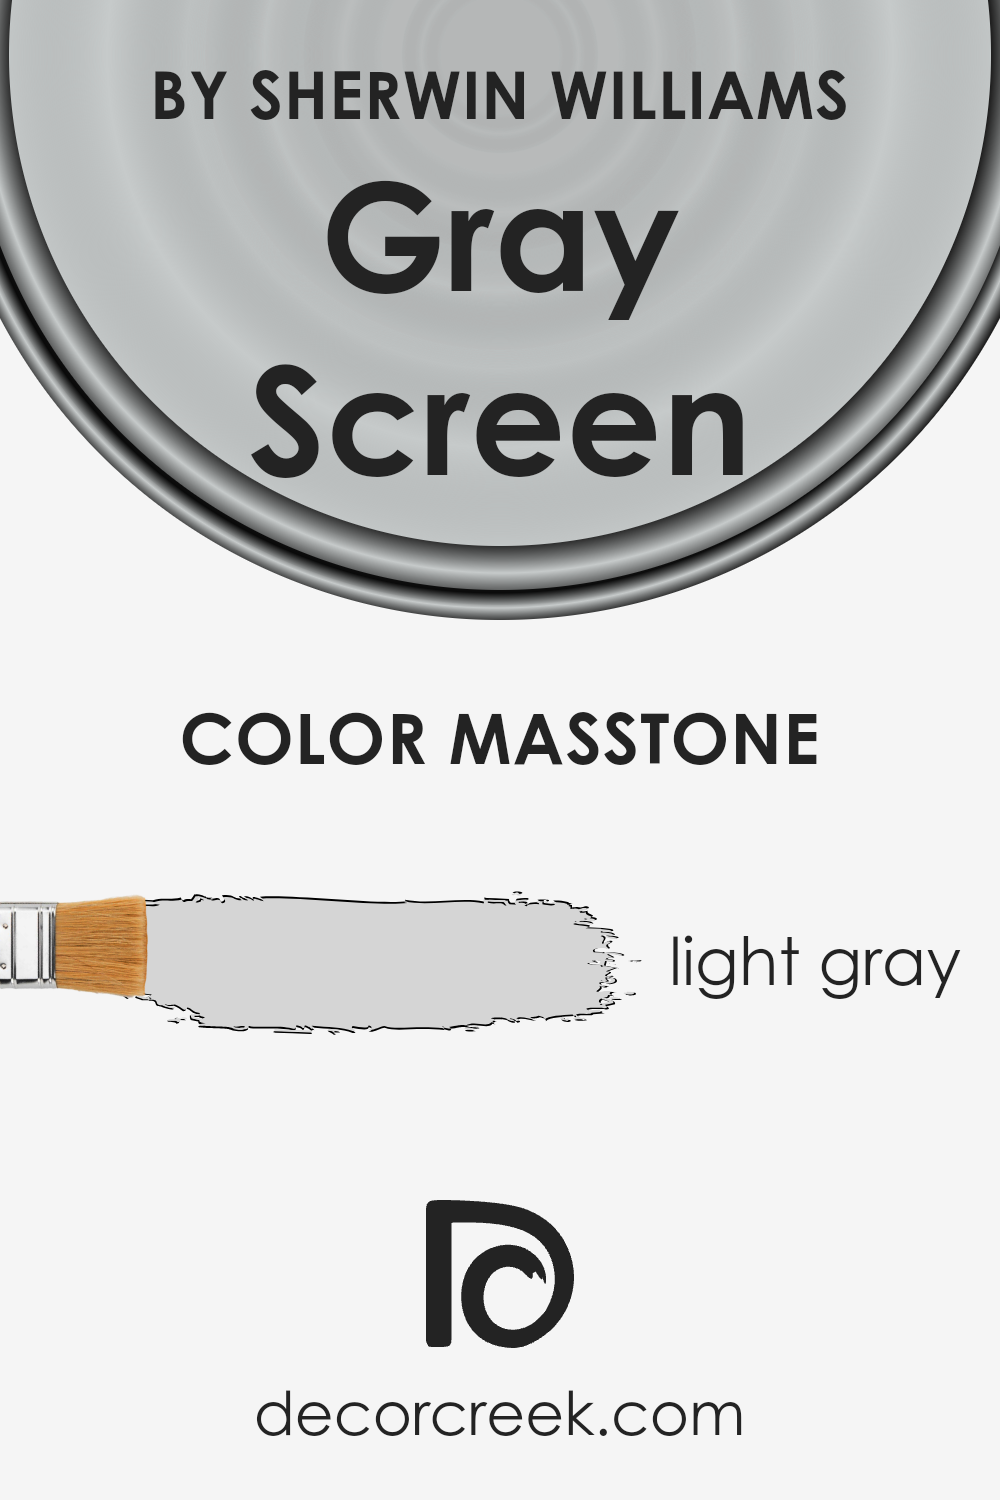 what_is_the_masstone_of_gray_screen_sw_7071